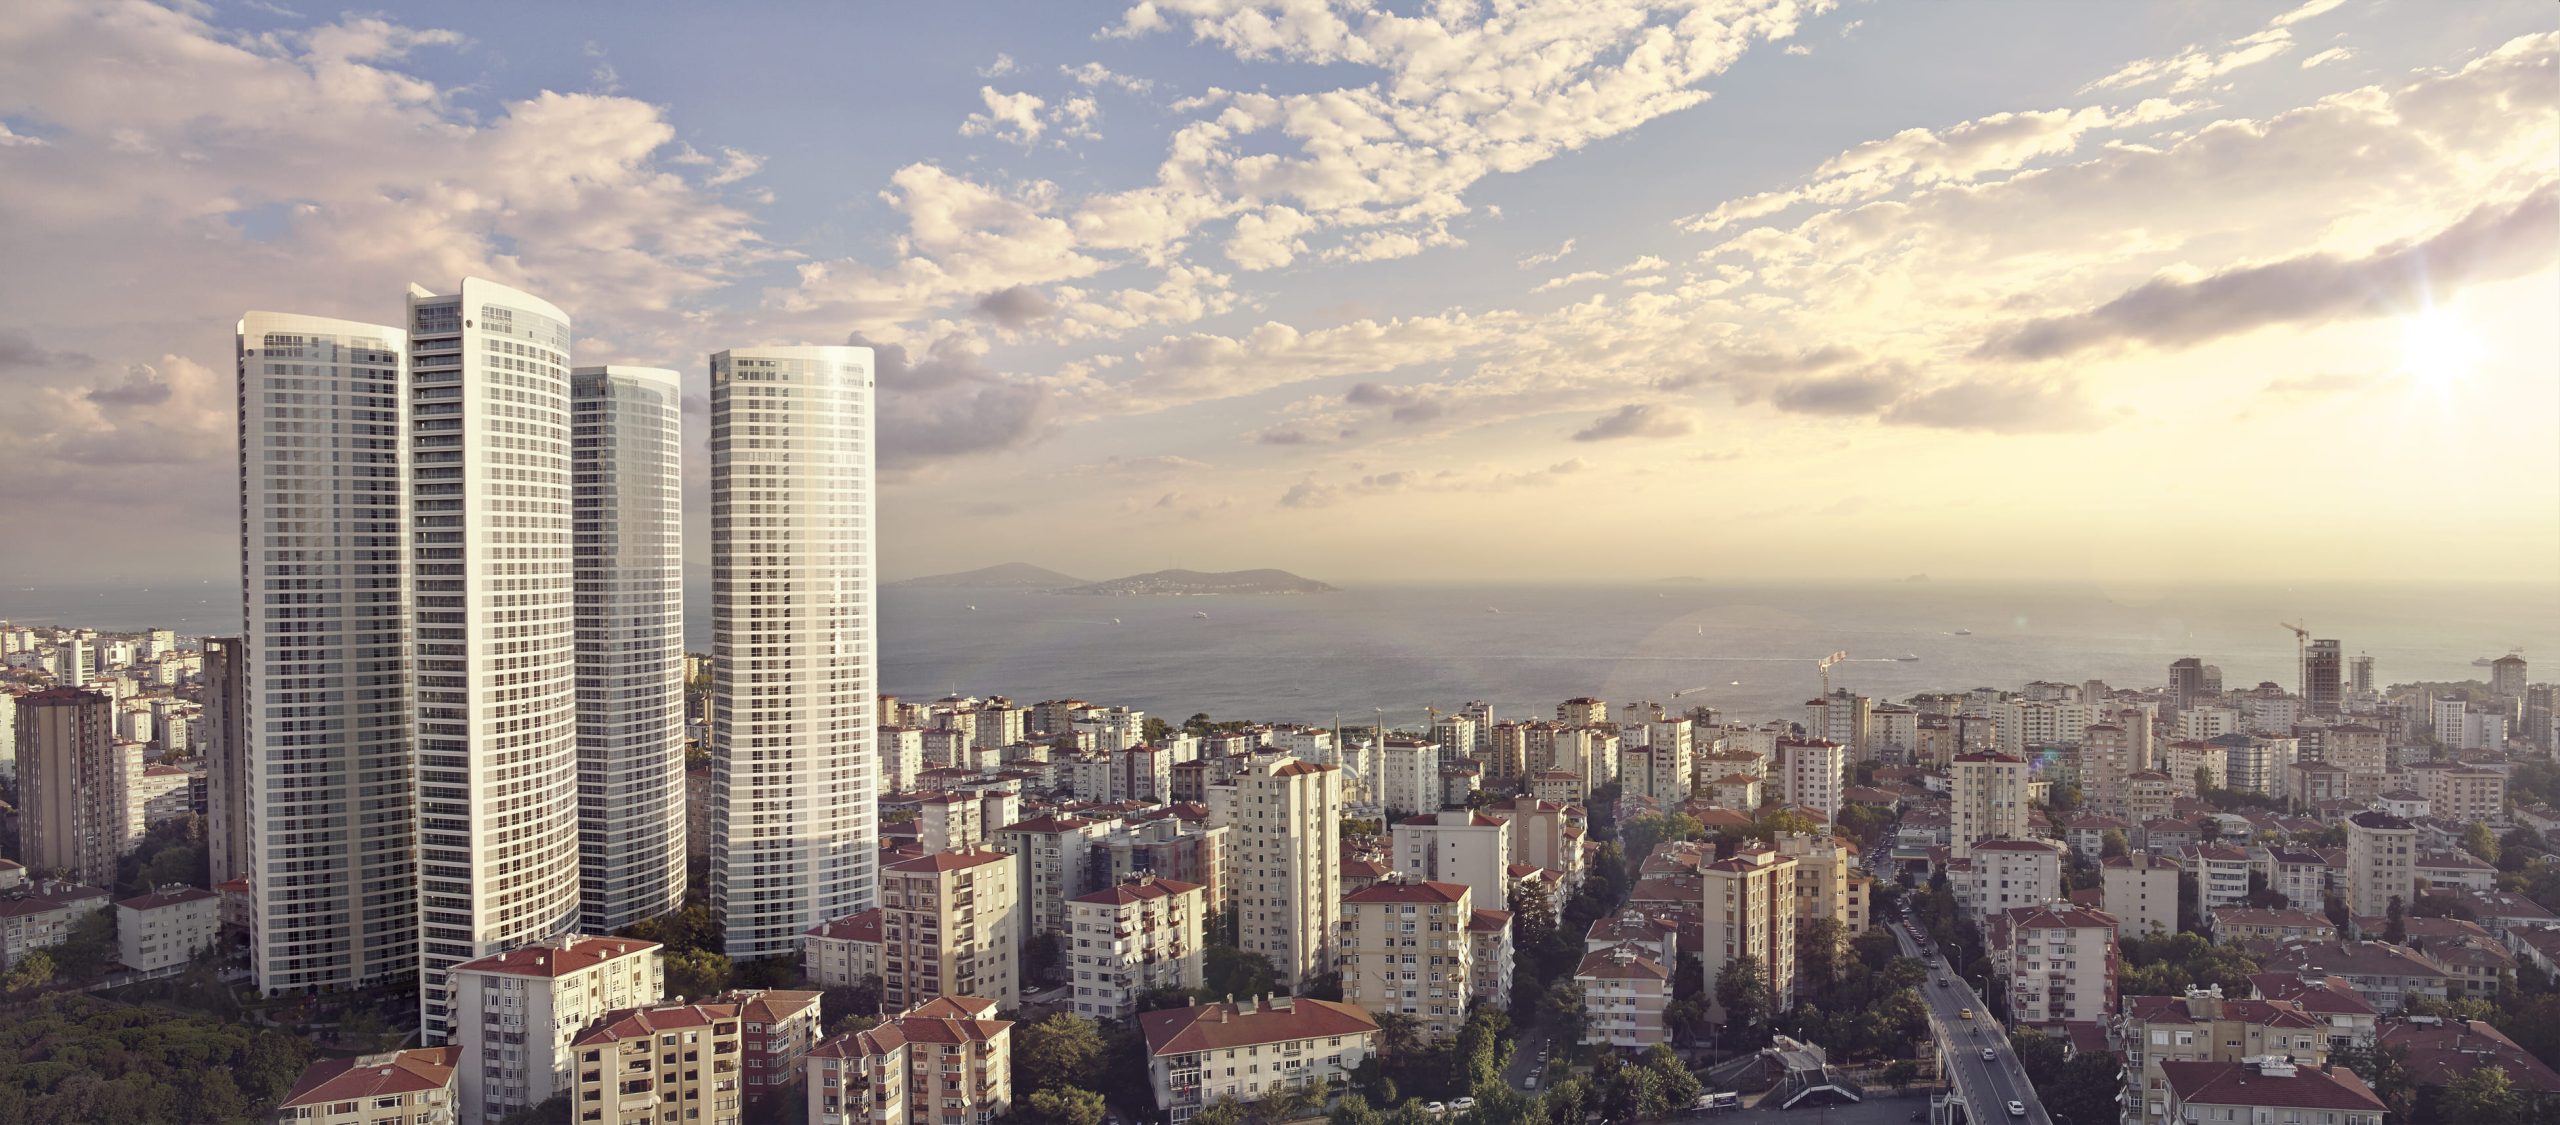 Sea View Apartment for Sale in Istanbul Bagdat Street Apartments 10 scaled 1